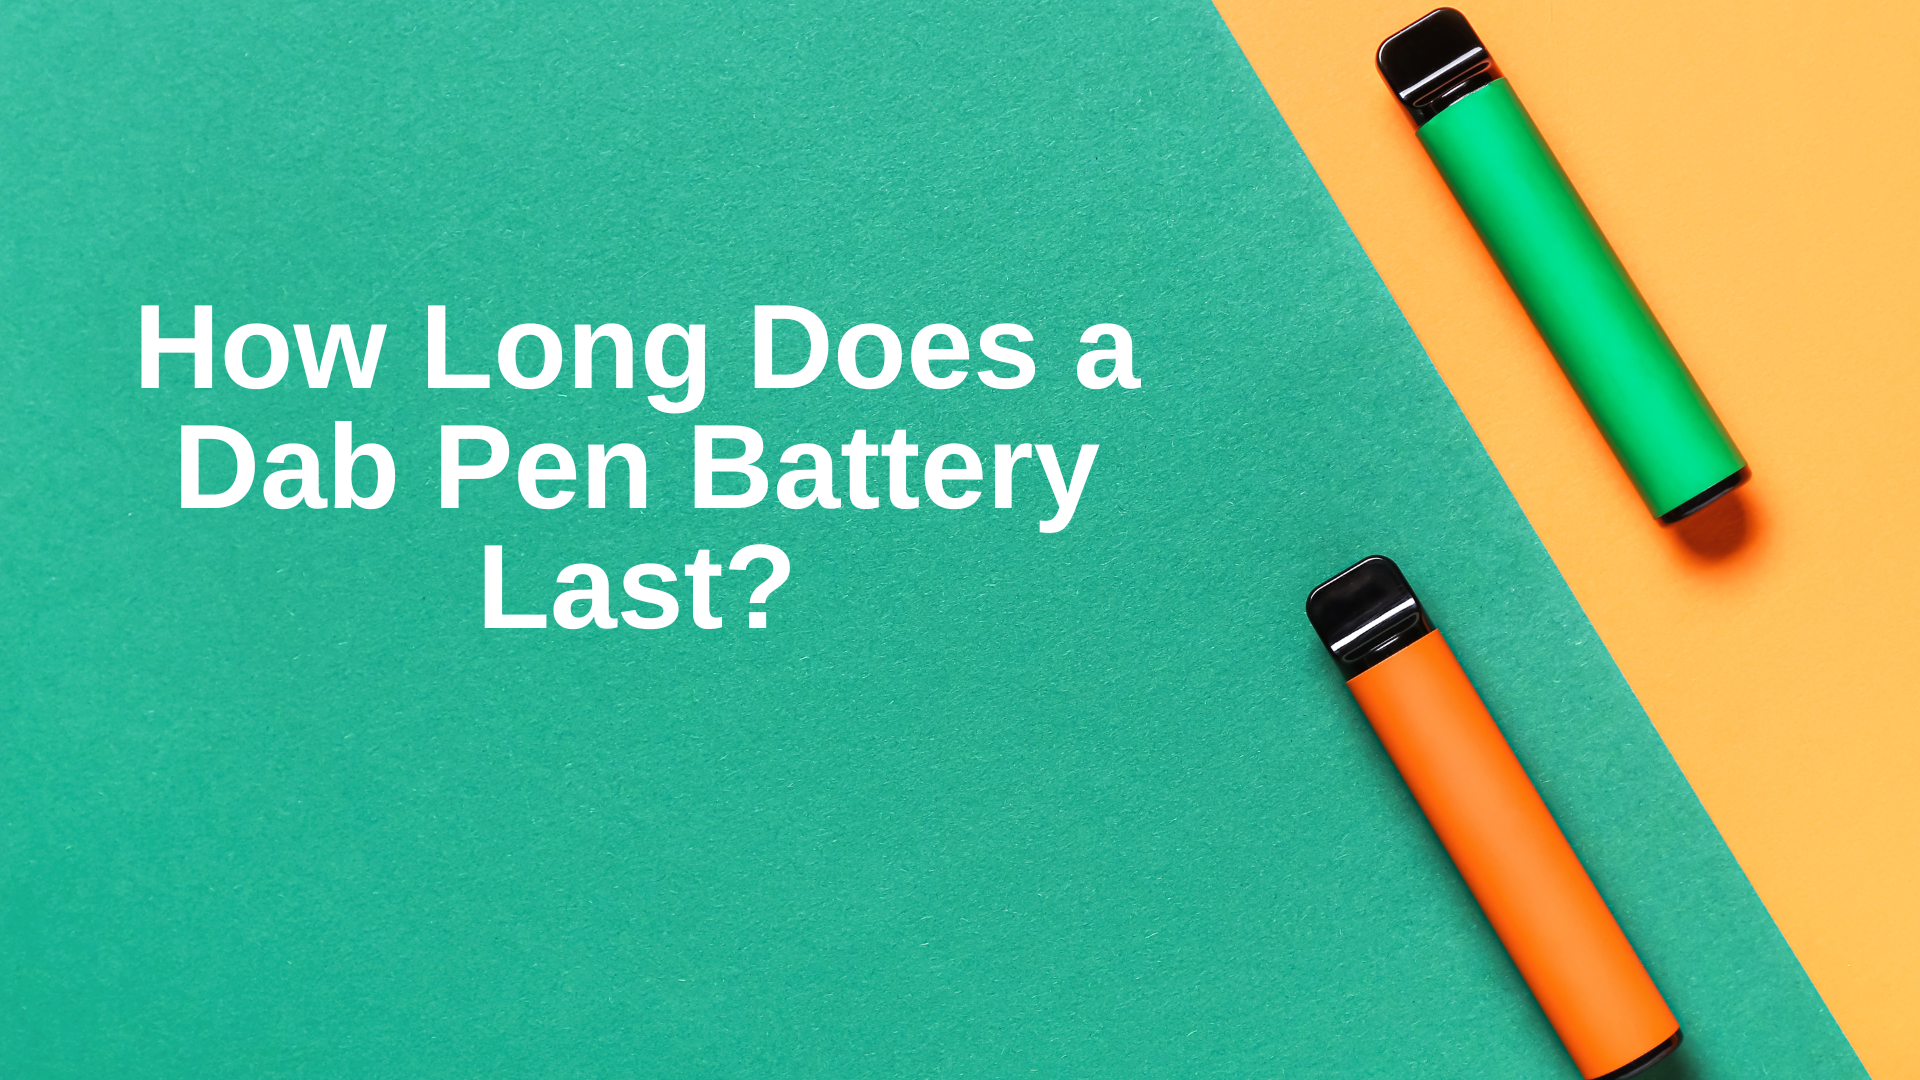 How Long Does a Dab Pen Battery Last? the Lifespan